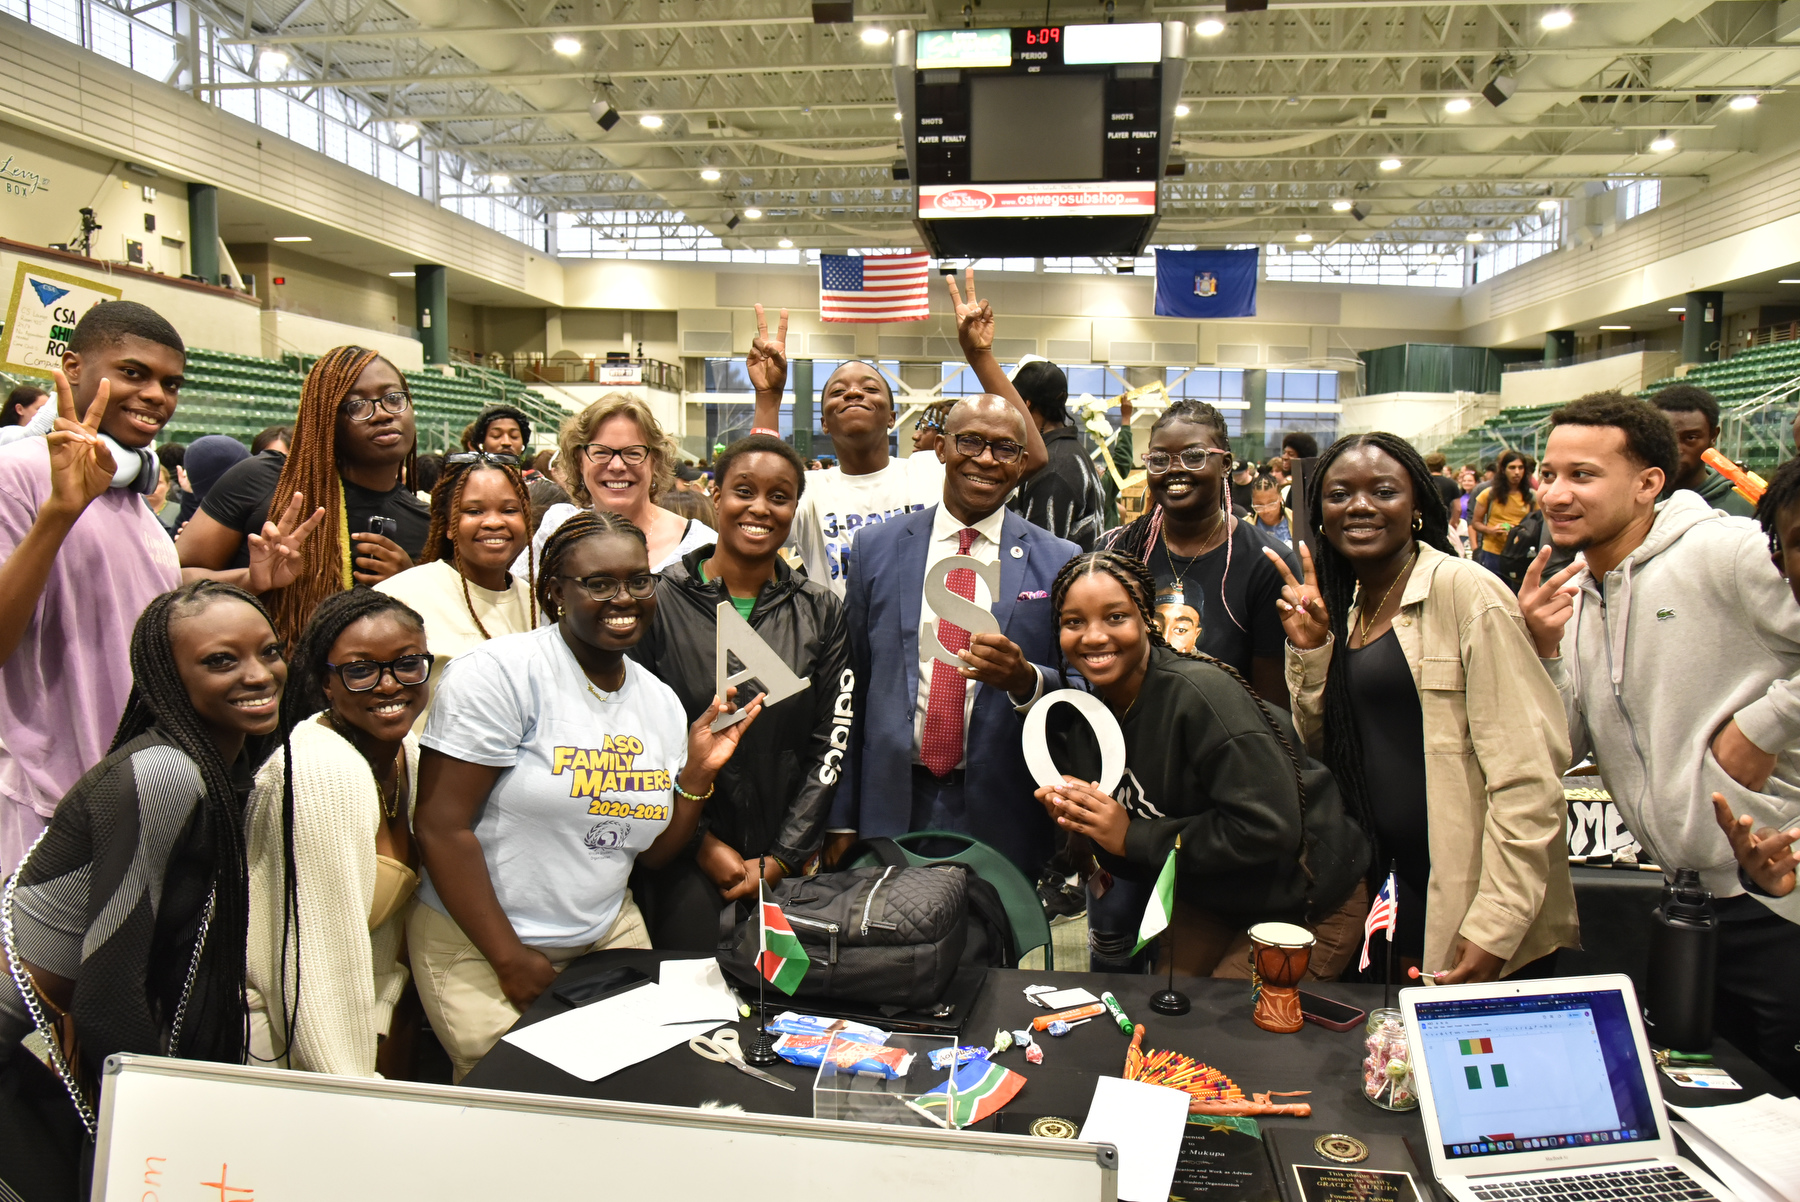 resident Peter O. Nwosu and Kathleen Kerr, Vice President for Student Affairs, gather with members of African Student Organization and other students Aug. 30 for a photo while visiting the fair.